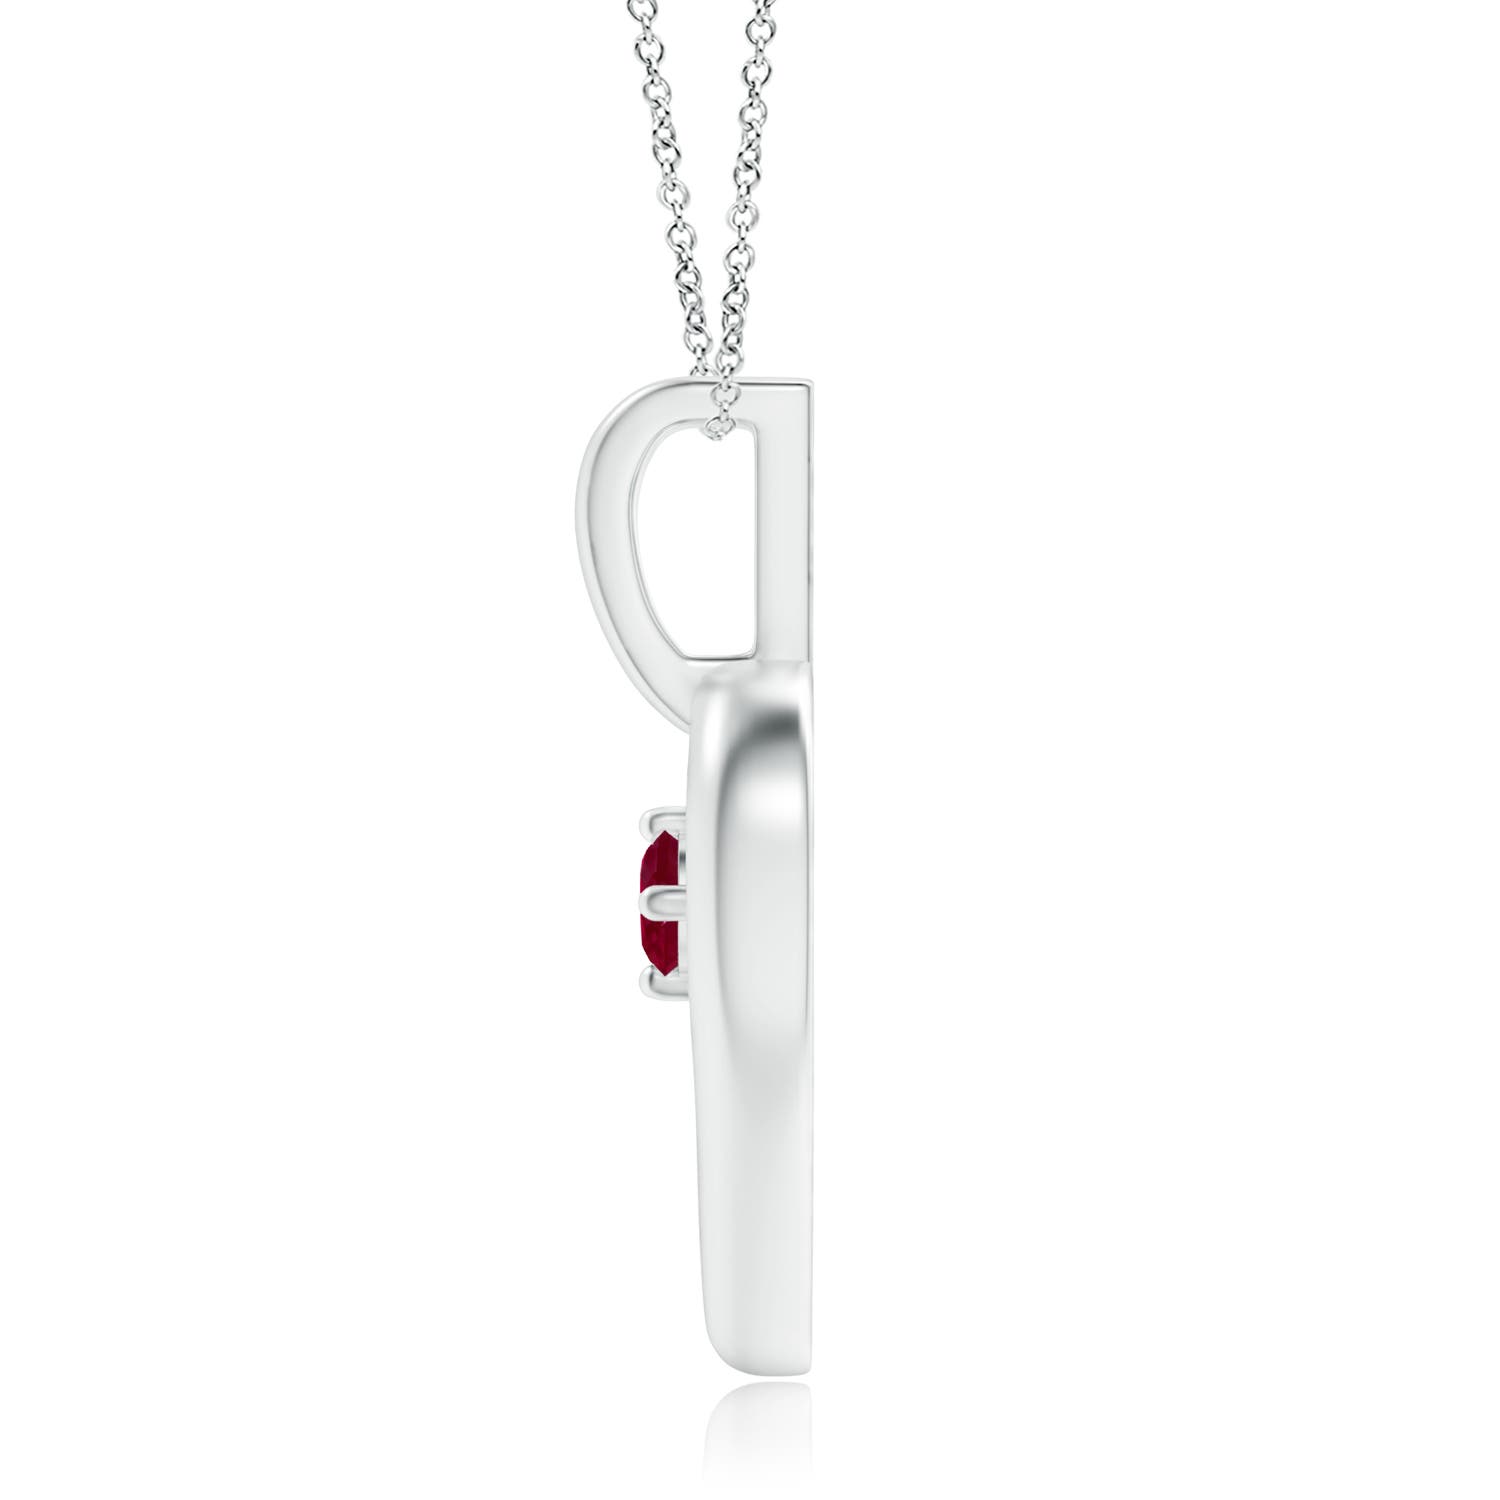 A - Ruby / 0.09 CT / 14 KT White Gold